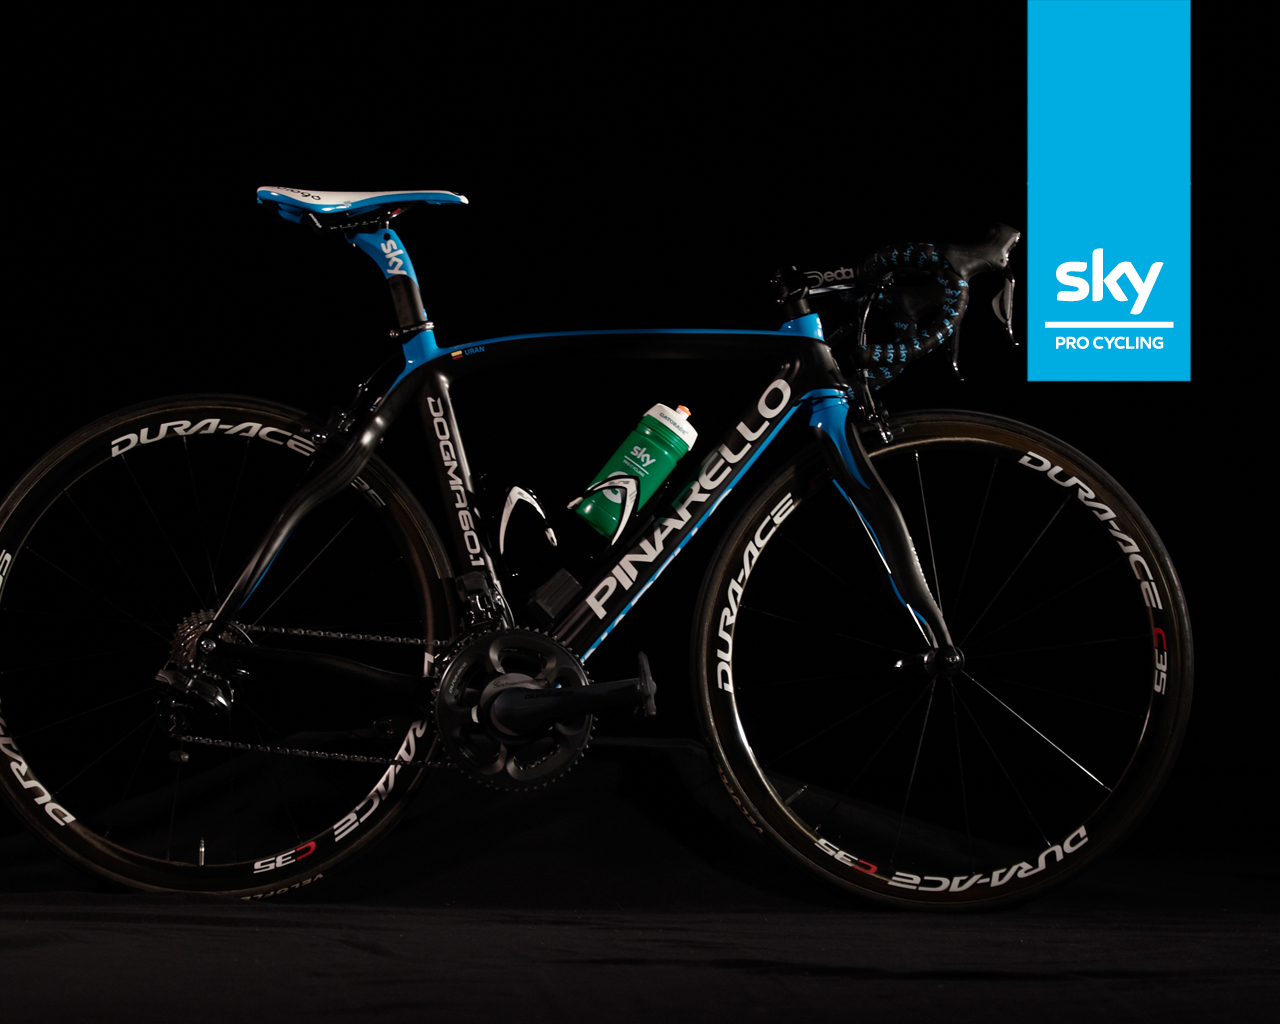 Team Sky Pro Cycling 488217 With Resolutions 12801024 Pixel